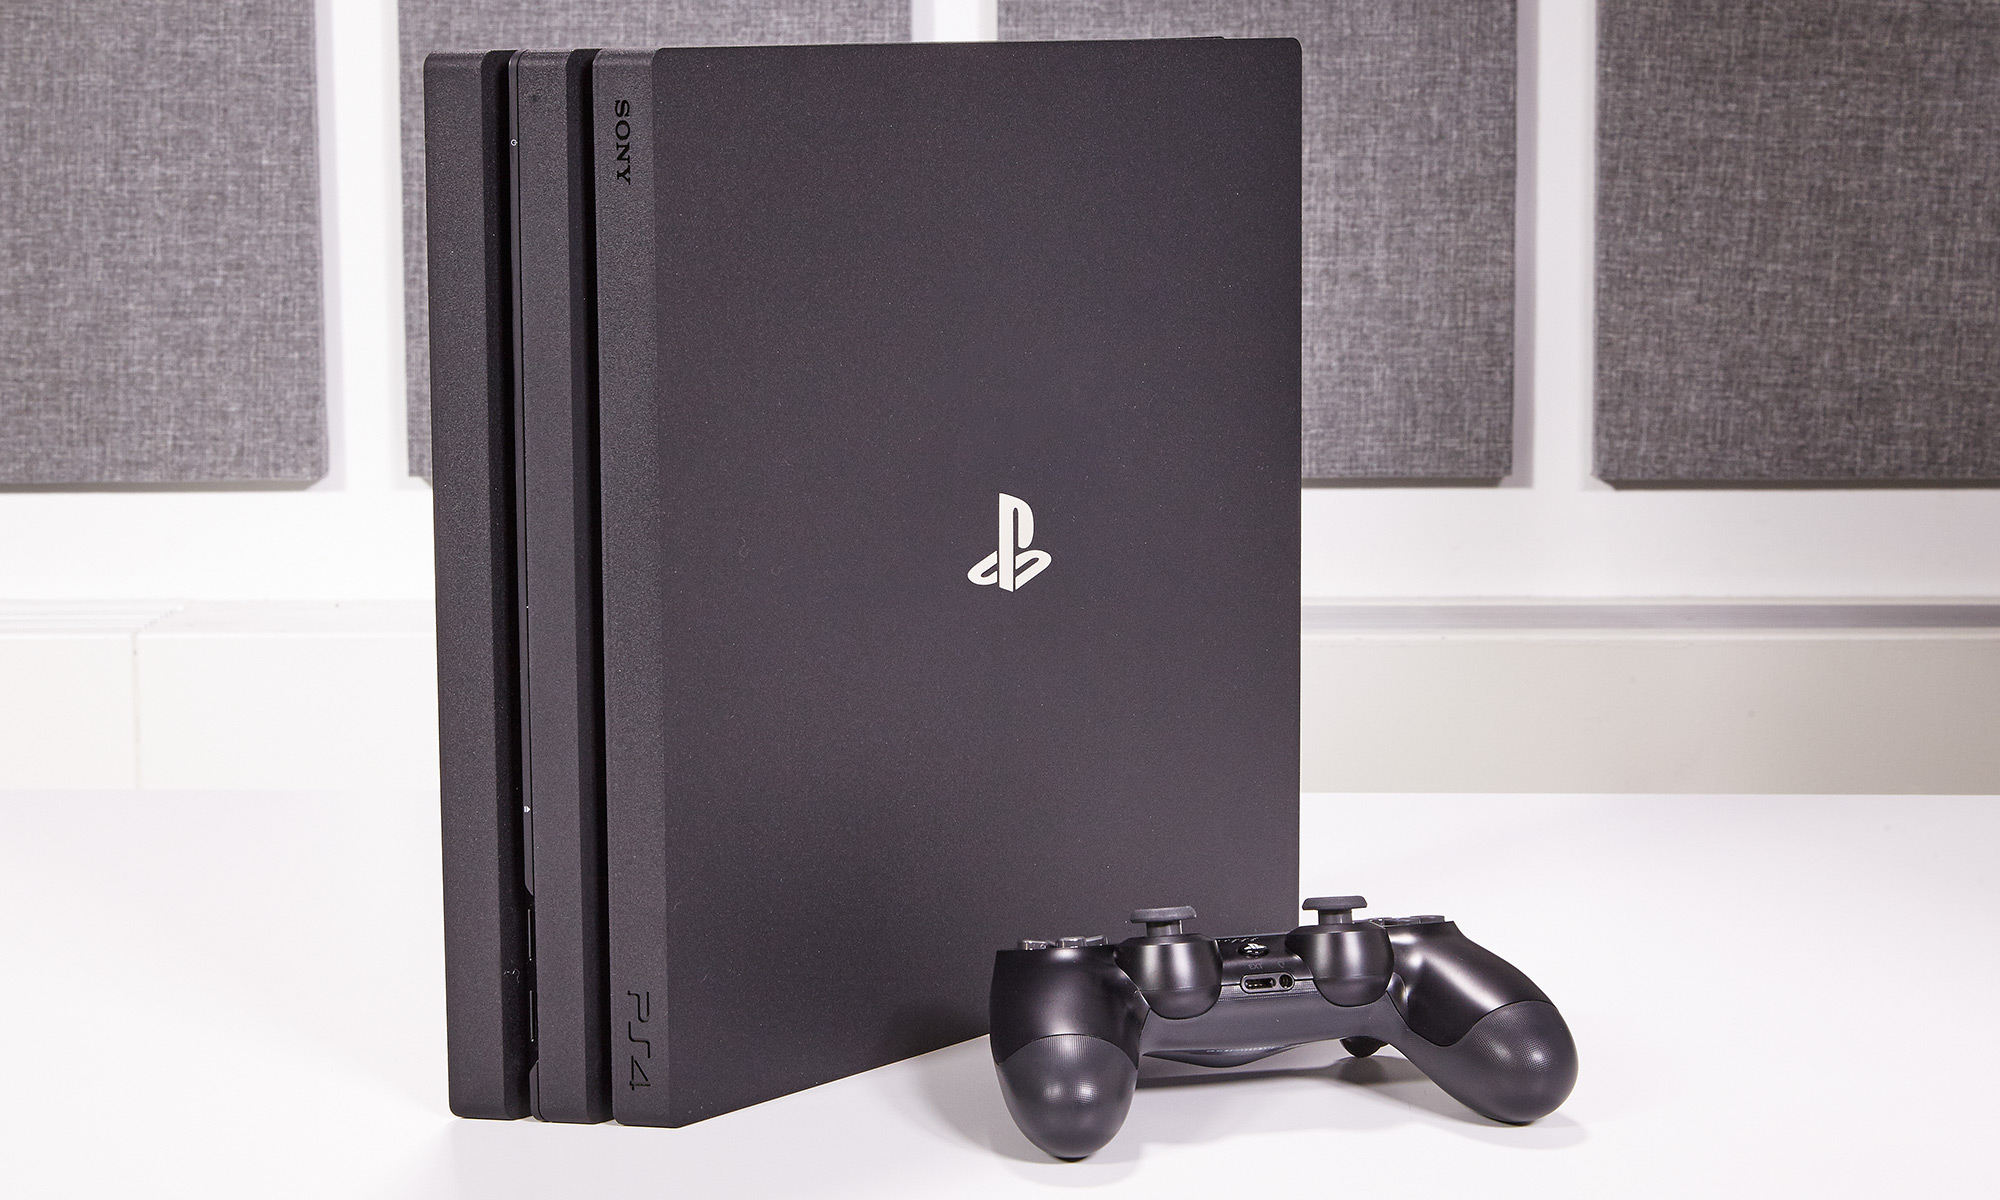 dragt hestekræfter krog PS4 Pro Review: The 4K Console to Beat | Tom's Guide